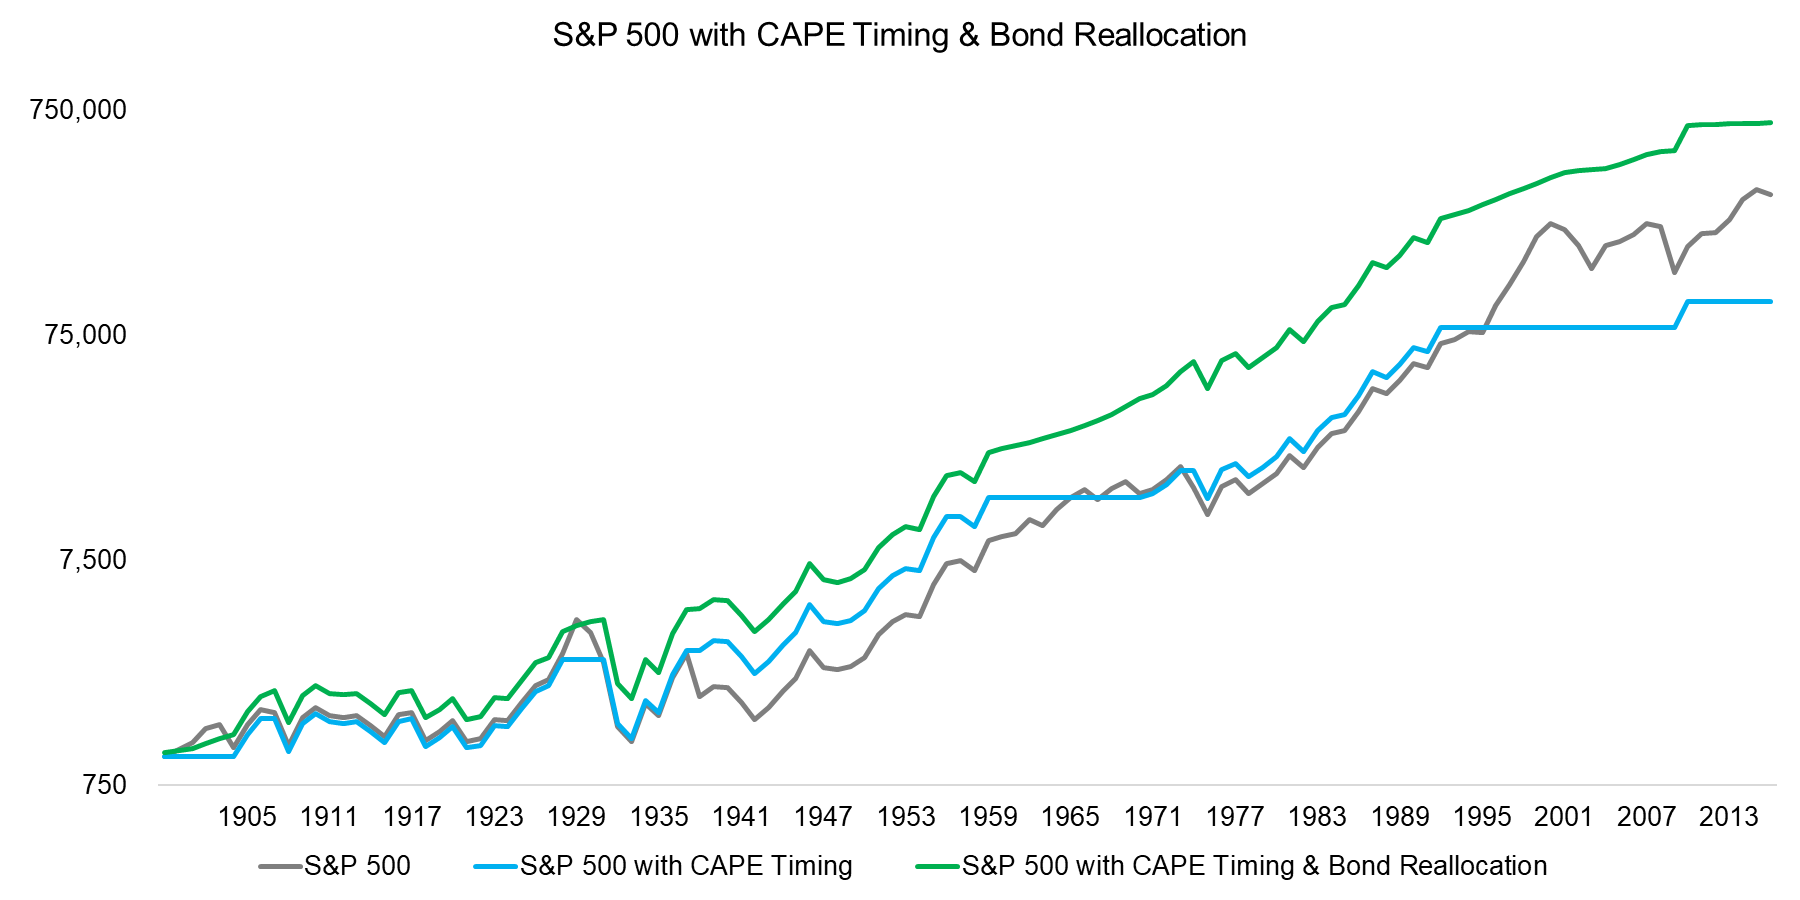 S&P 500 with CAPE Timing & Bond Reallocation